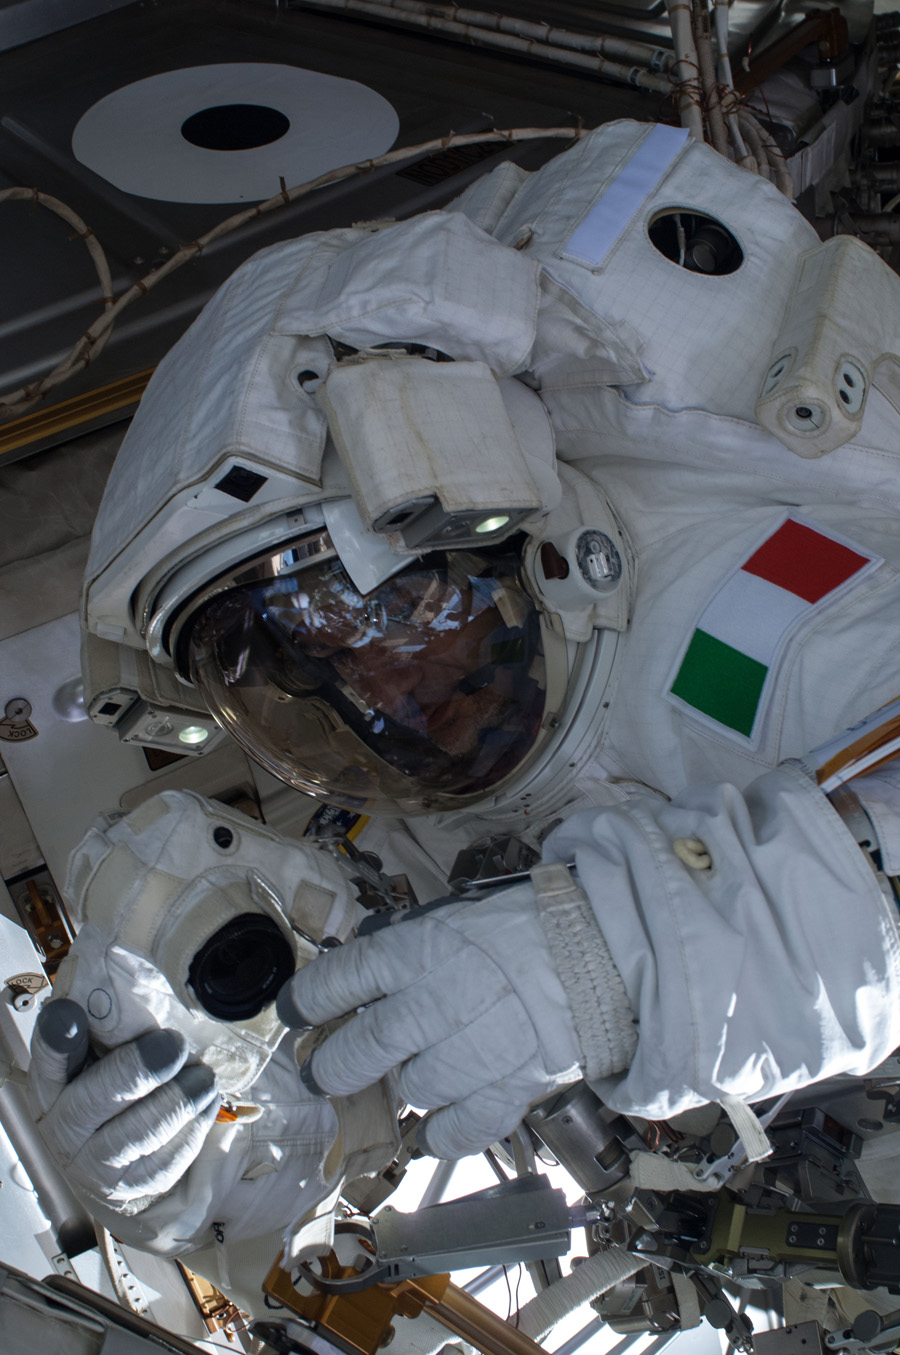 ESA astronaut Luca Parmitano works on the International Space Station during a spacewalk July 16, 2013. Just over an hour into the spacewalk, Parmitano reported that water was floating behind his head inside his helmet.  The water was not an immediate danger to Parmitano's health, but Mission Control decided to end the spacewalk early.  This image was posted on July 16, 2013.